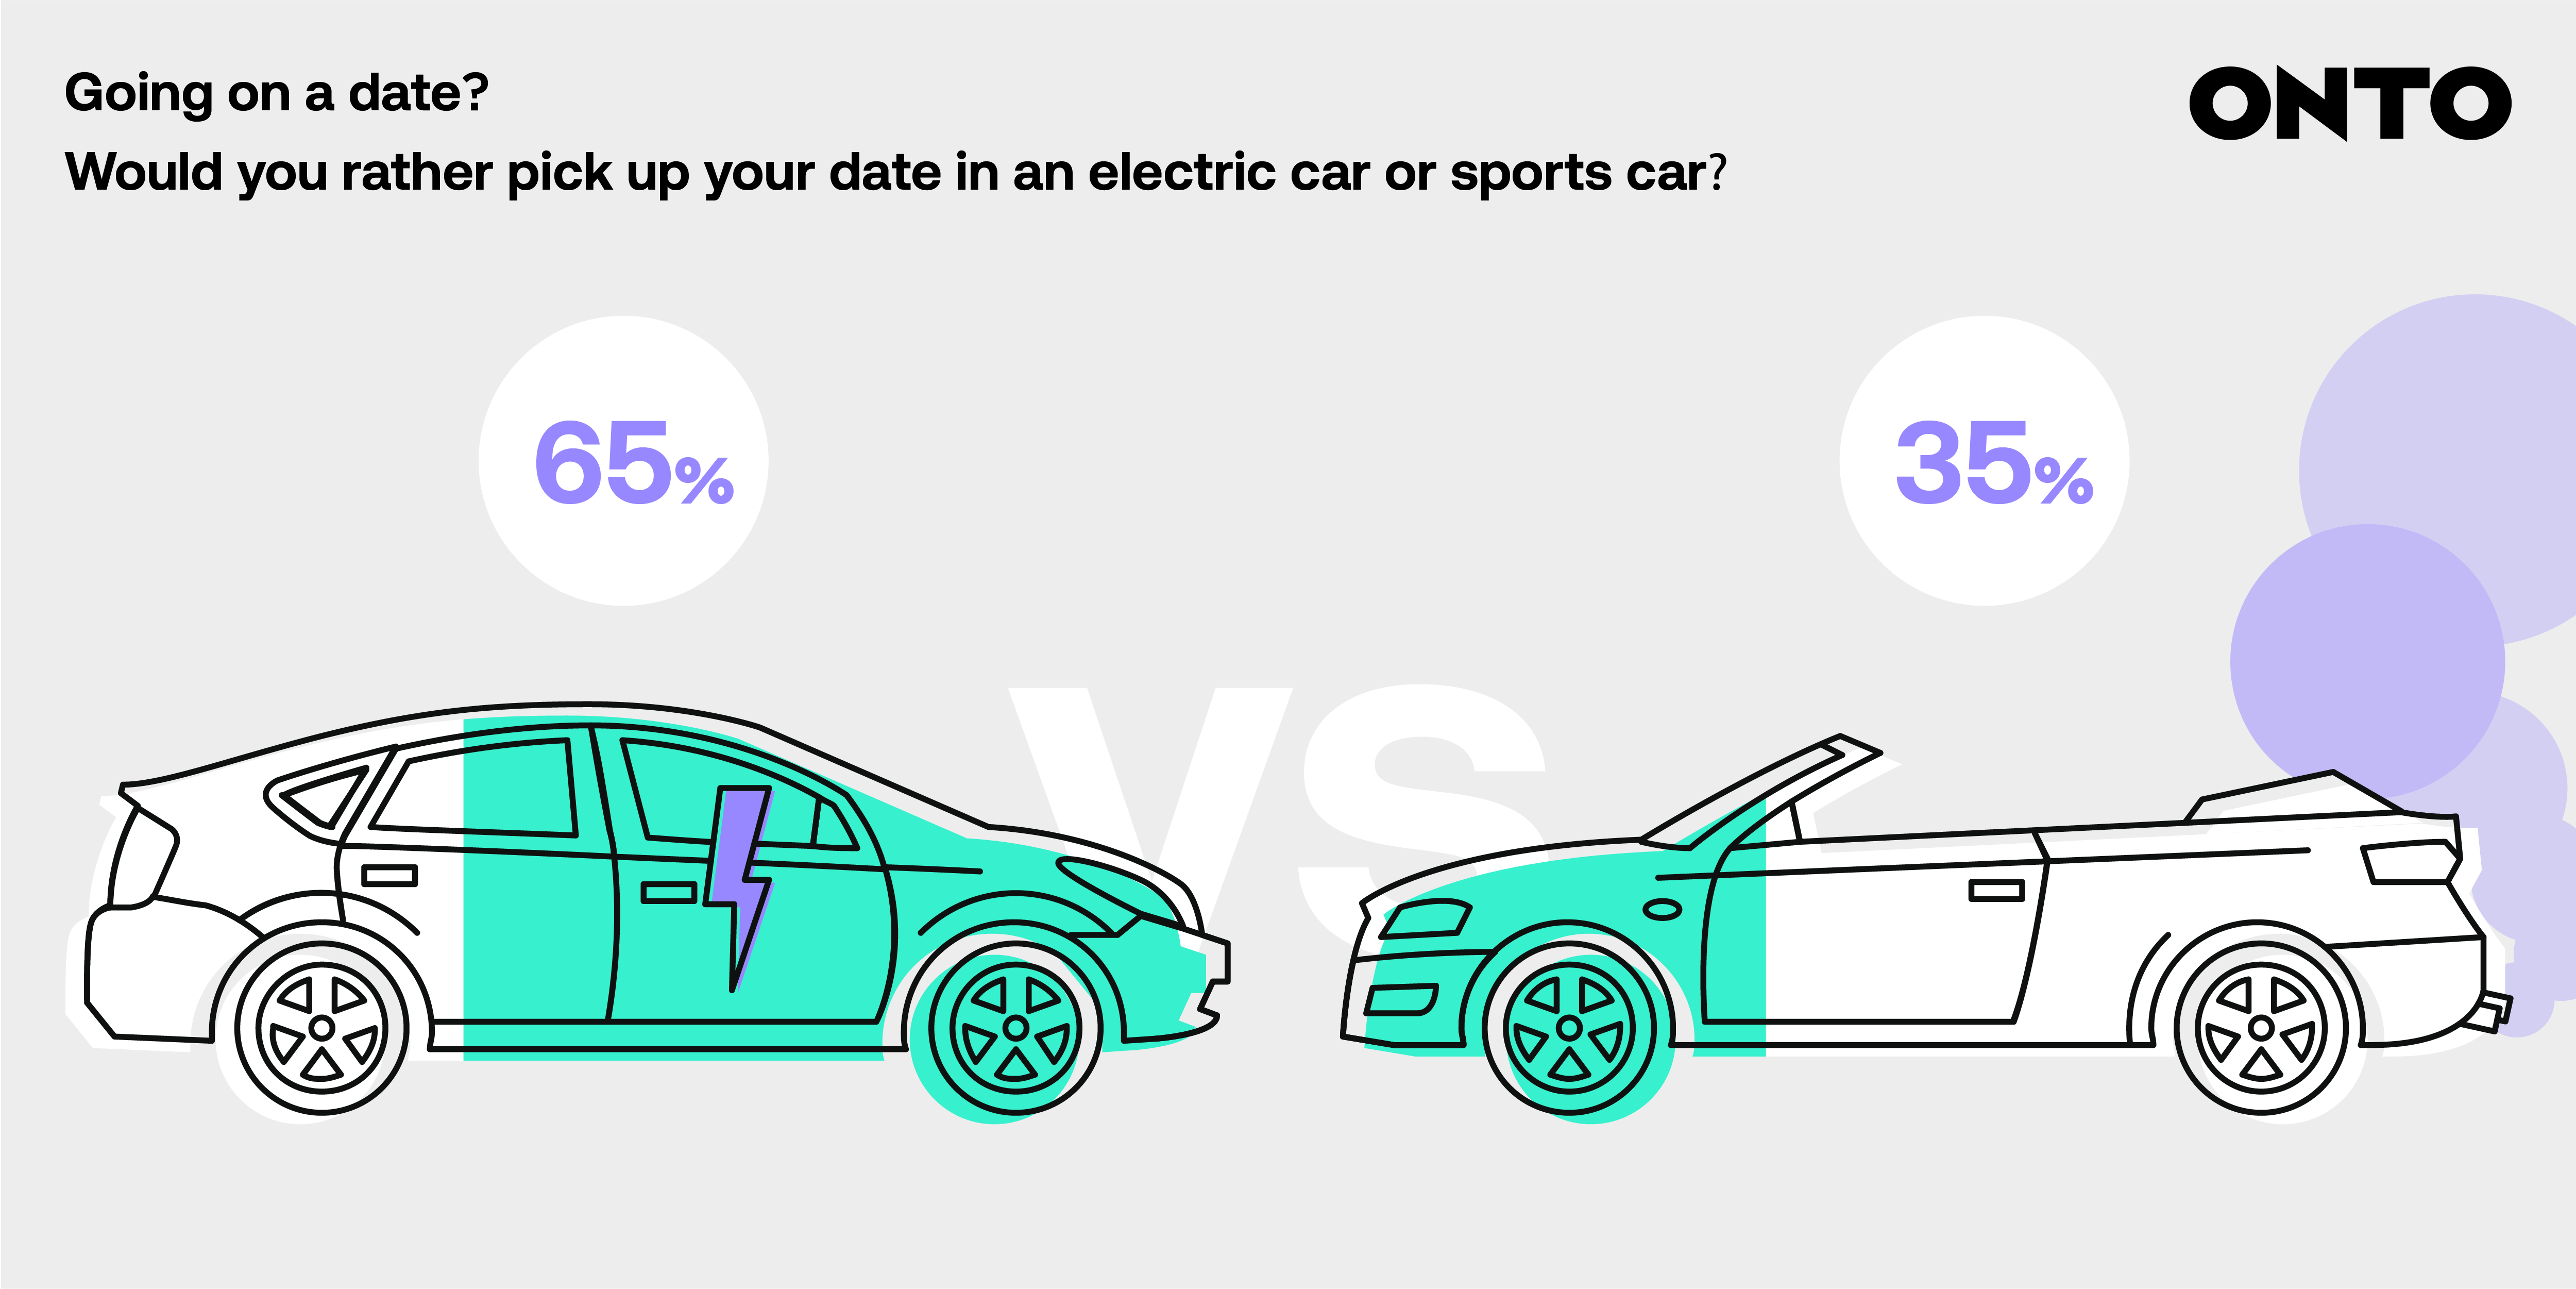 A diagram showing that 65% of people would rather pick up their date in an electric car compared to 35% who would prefer to pick up their date in a sports car.